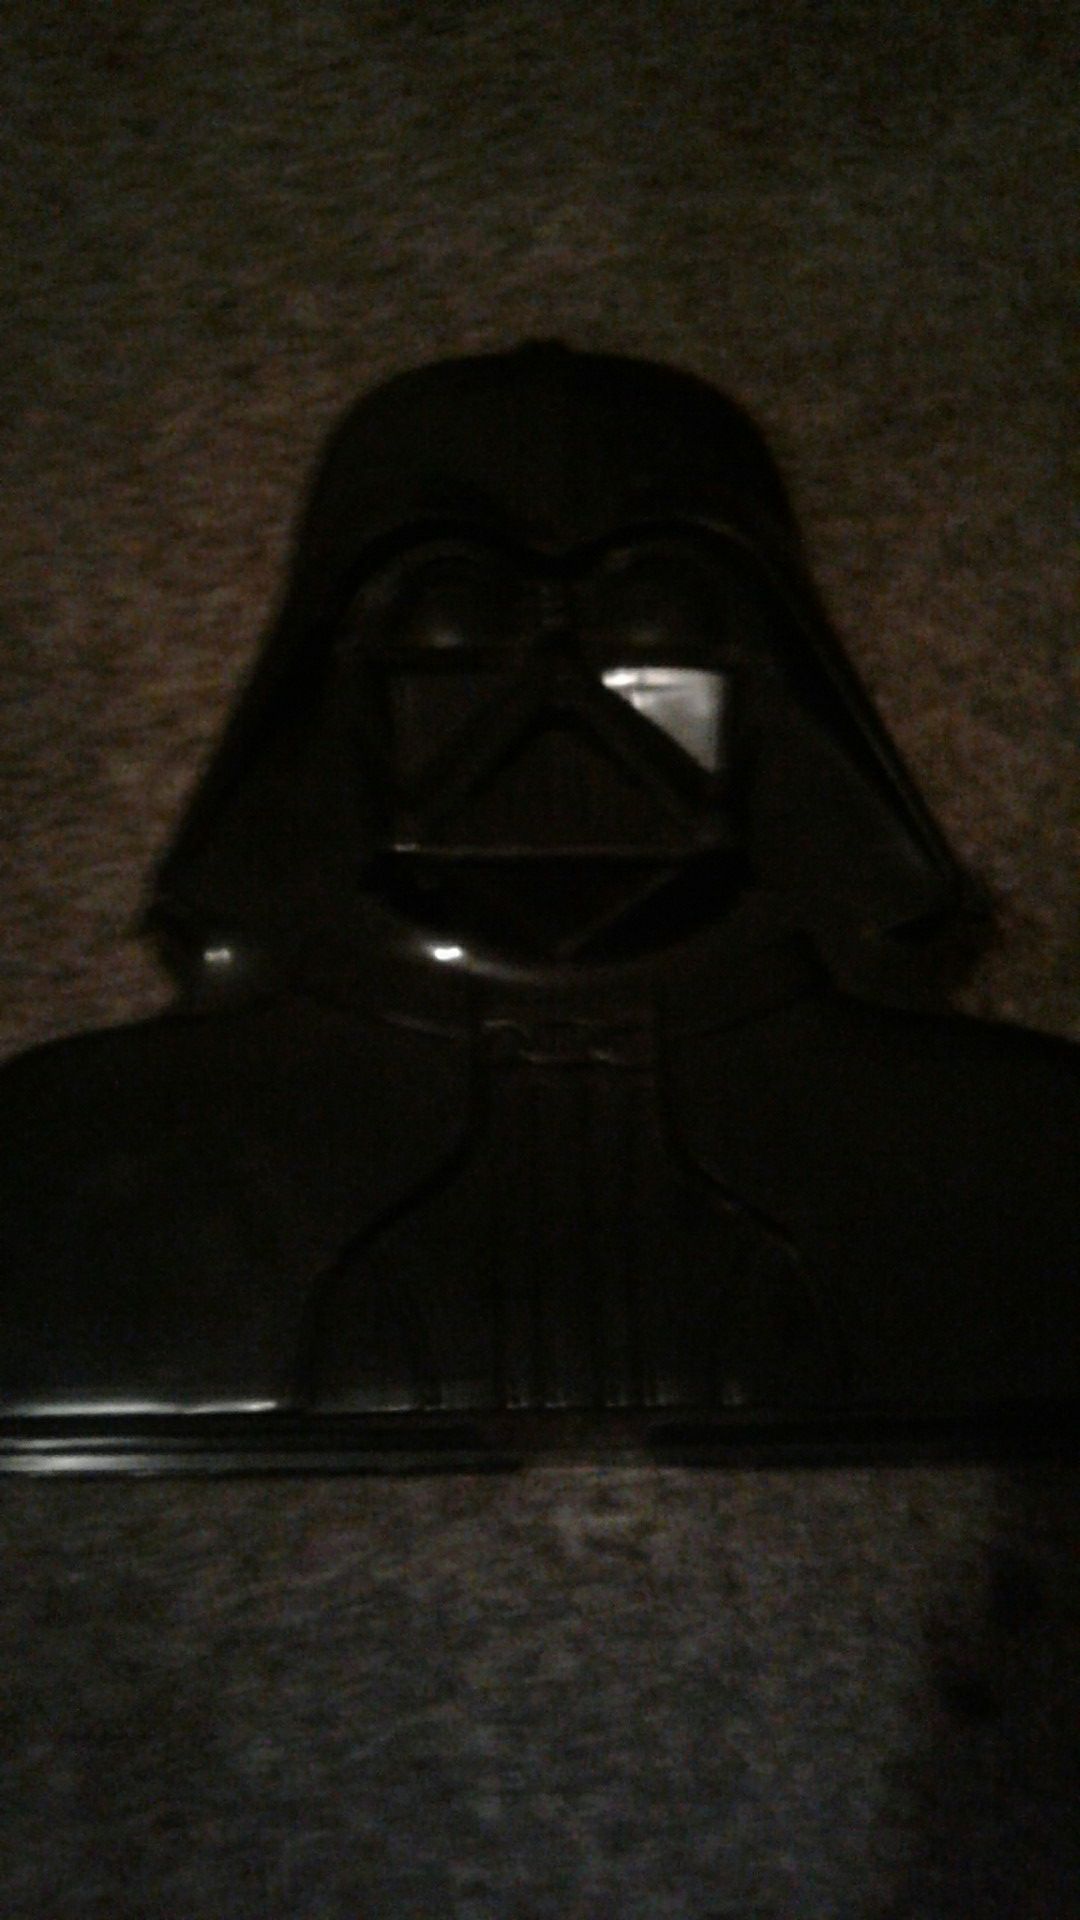 Star Wars carrying case